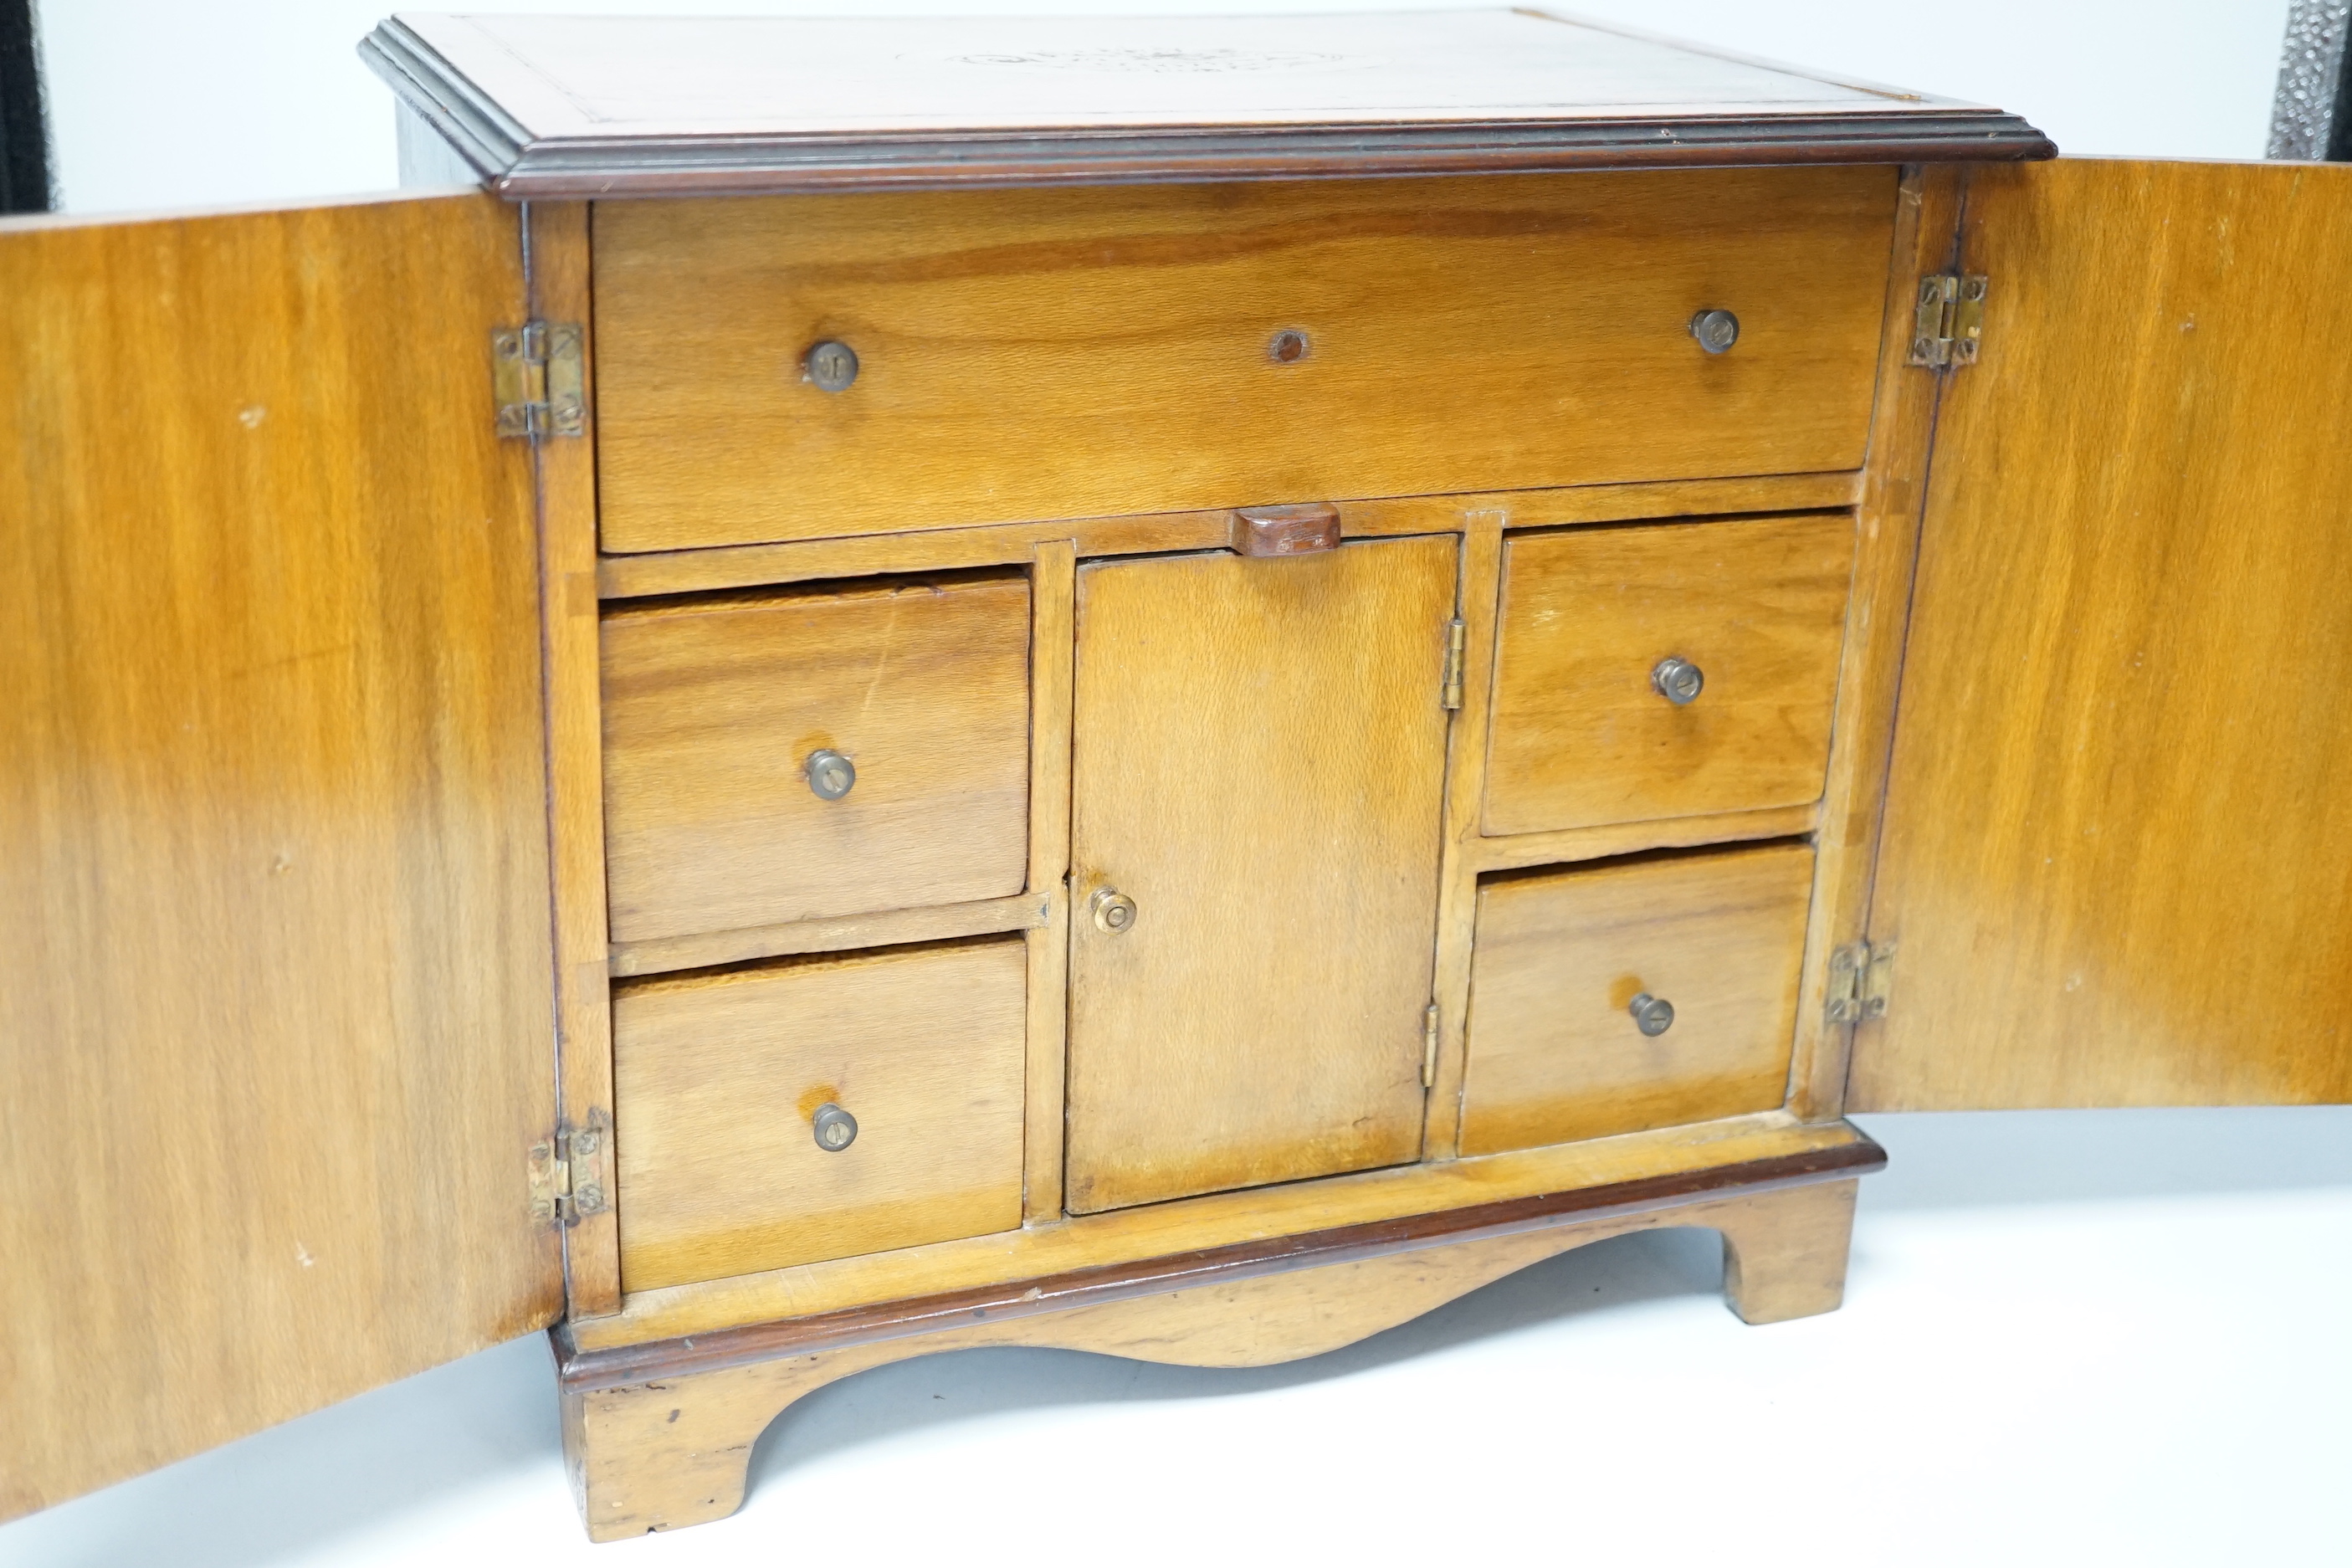 An Edwardian inlaid sycamore two door jewellery chest, 29cm high x 31cm wide